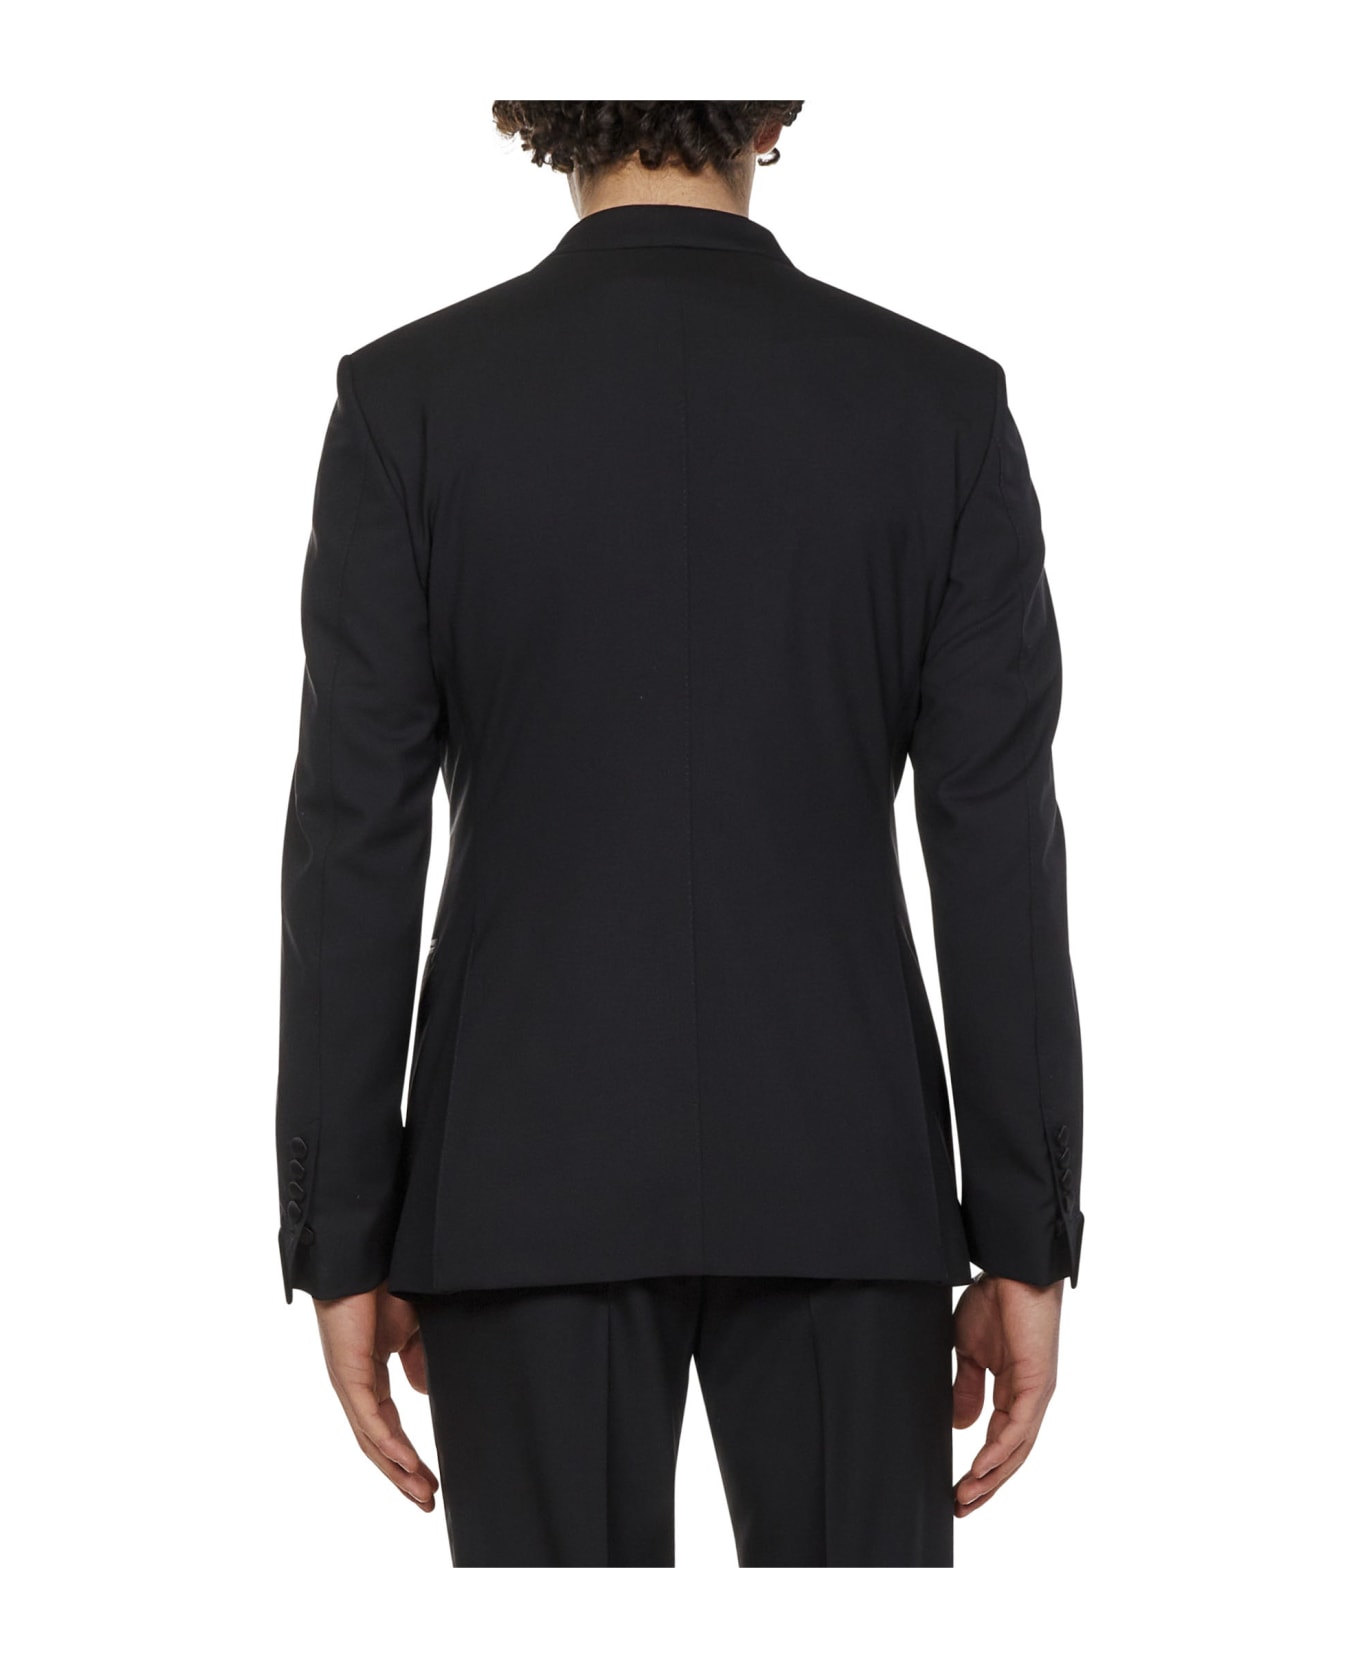 Tom Ford O' Connor Suit - Black